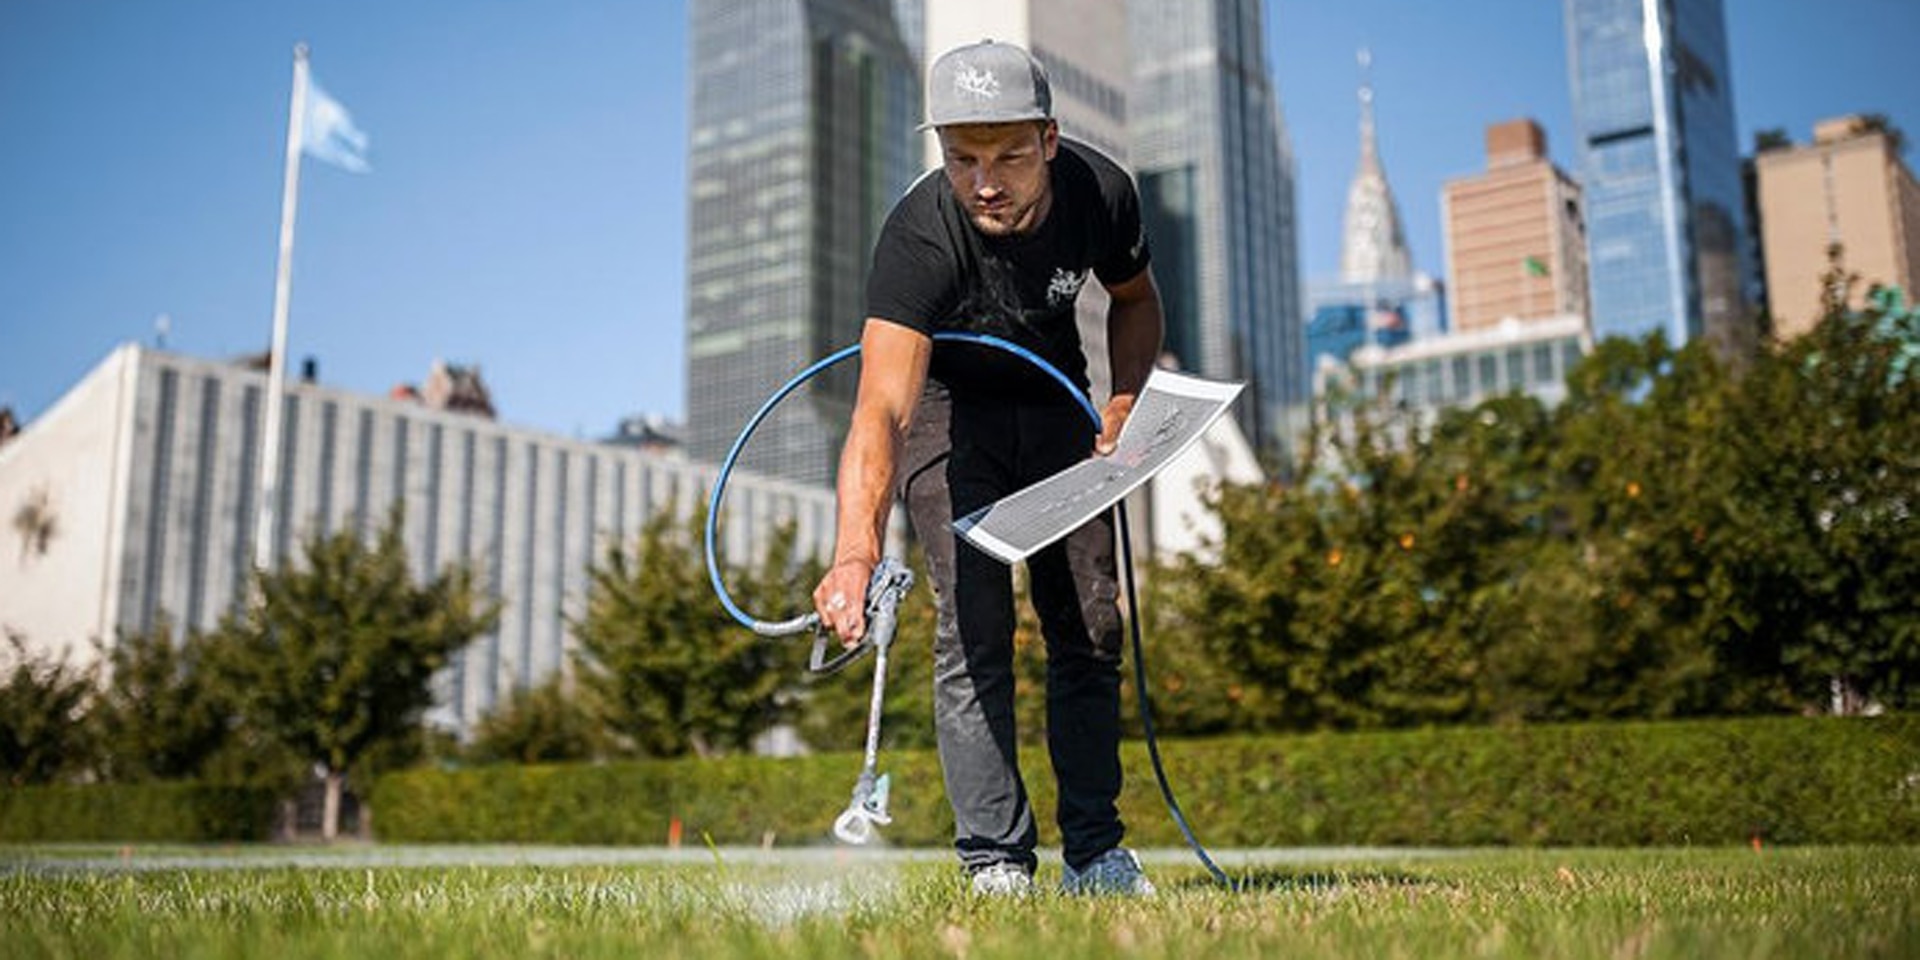 A young man is painting on the lawn in the middle of New York.